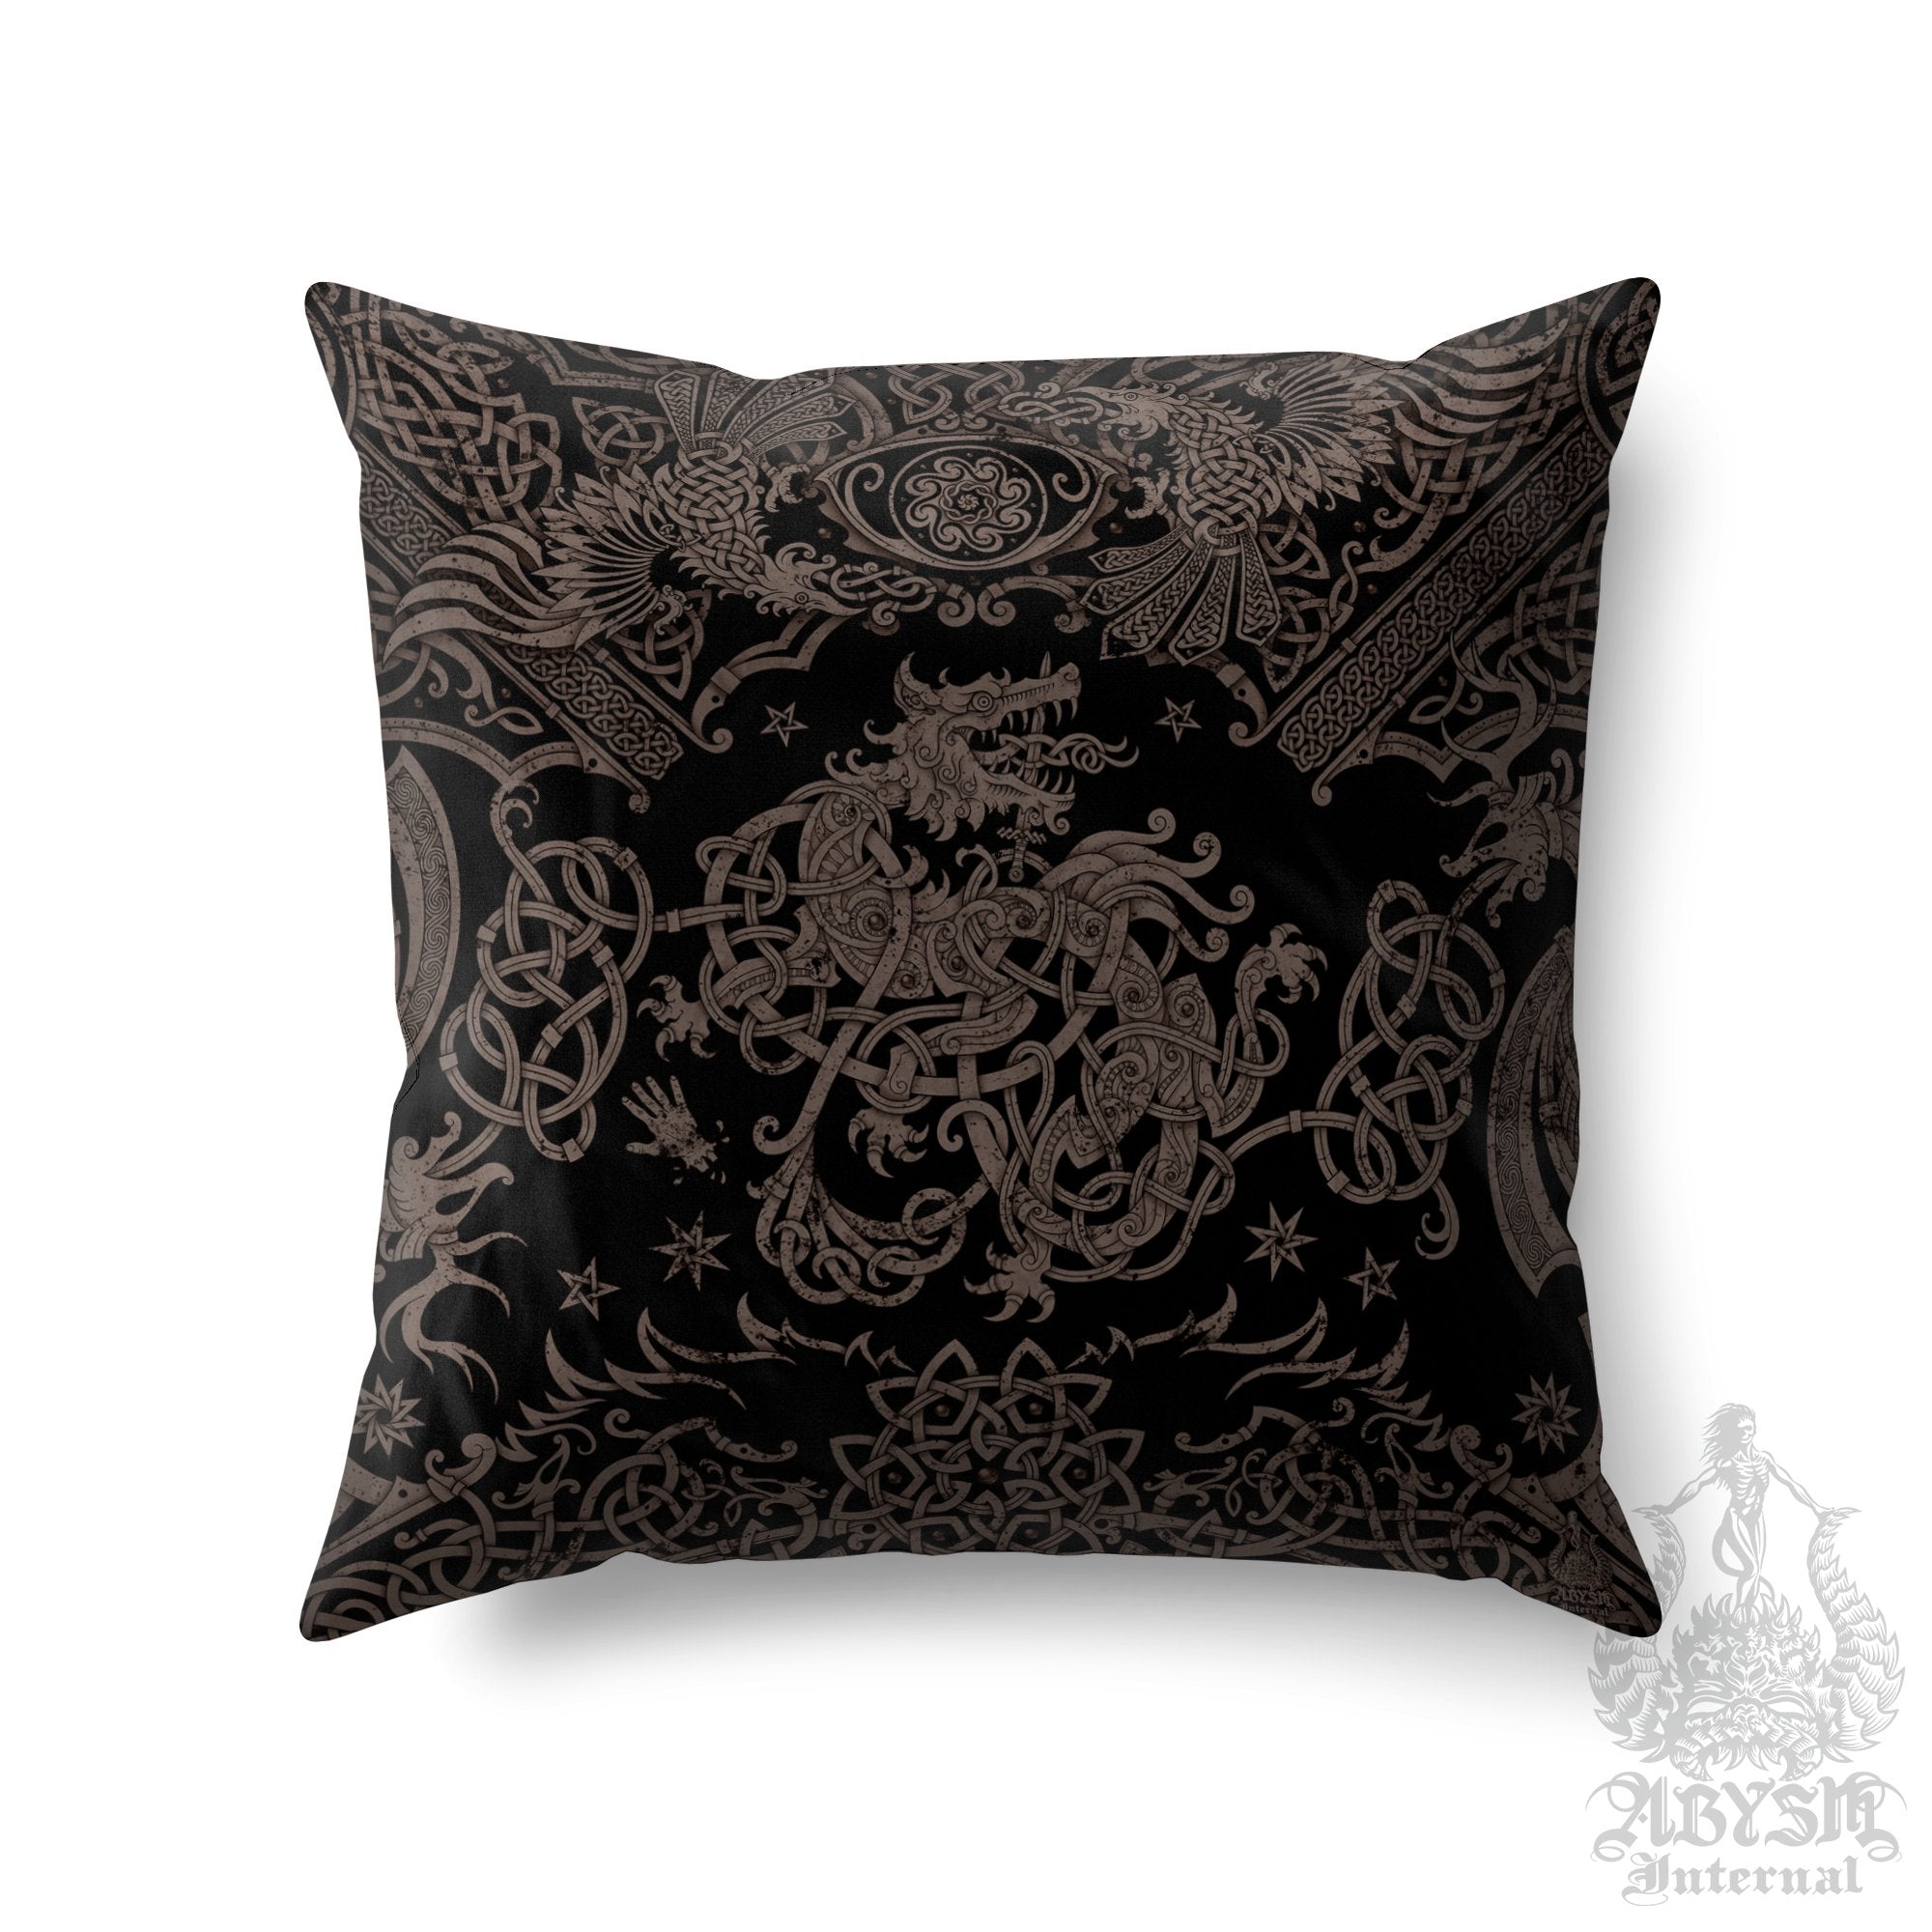 Viking Wolf Throw Pillow, Decorative Accent Pillow, Square Cushion Cover, Norse Room Decor, Fenrir Knotwork, Nordic Art, Alternative Home - Black Grey Grit - Abysm Internal